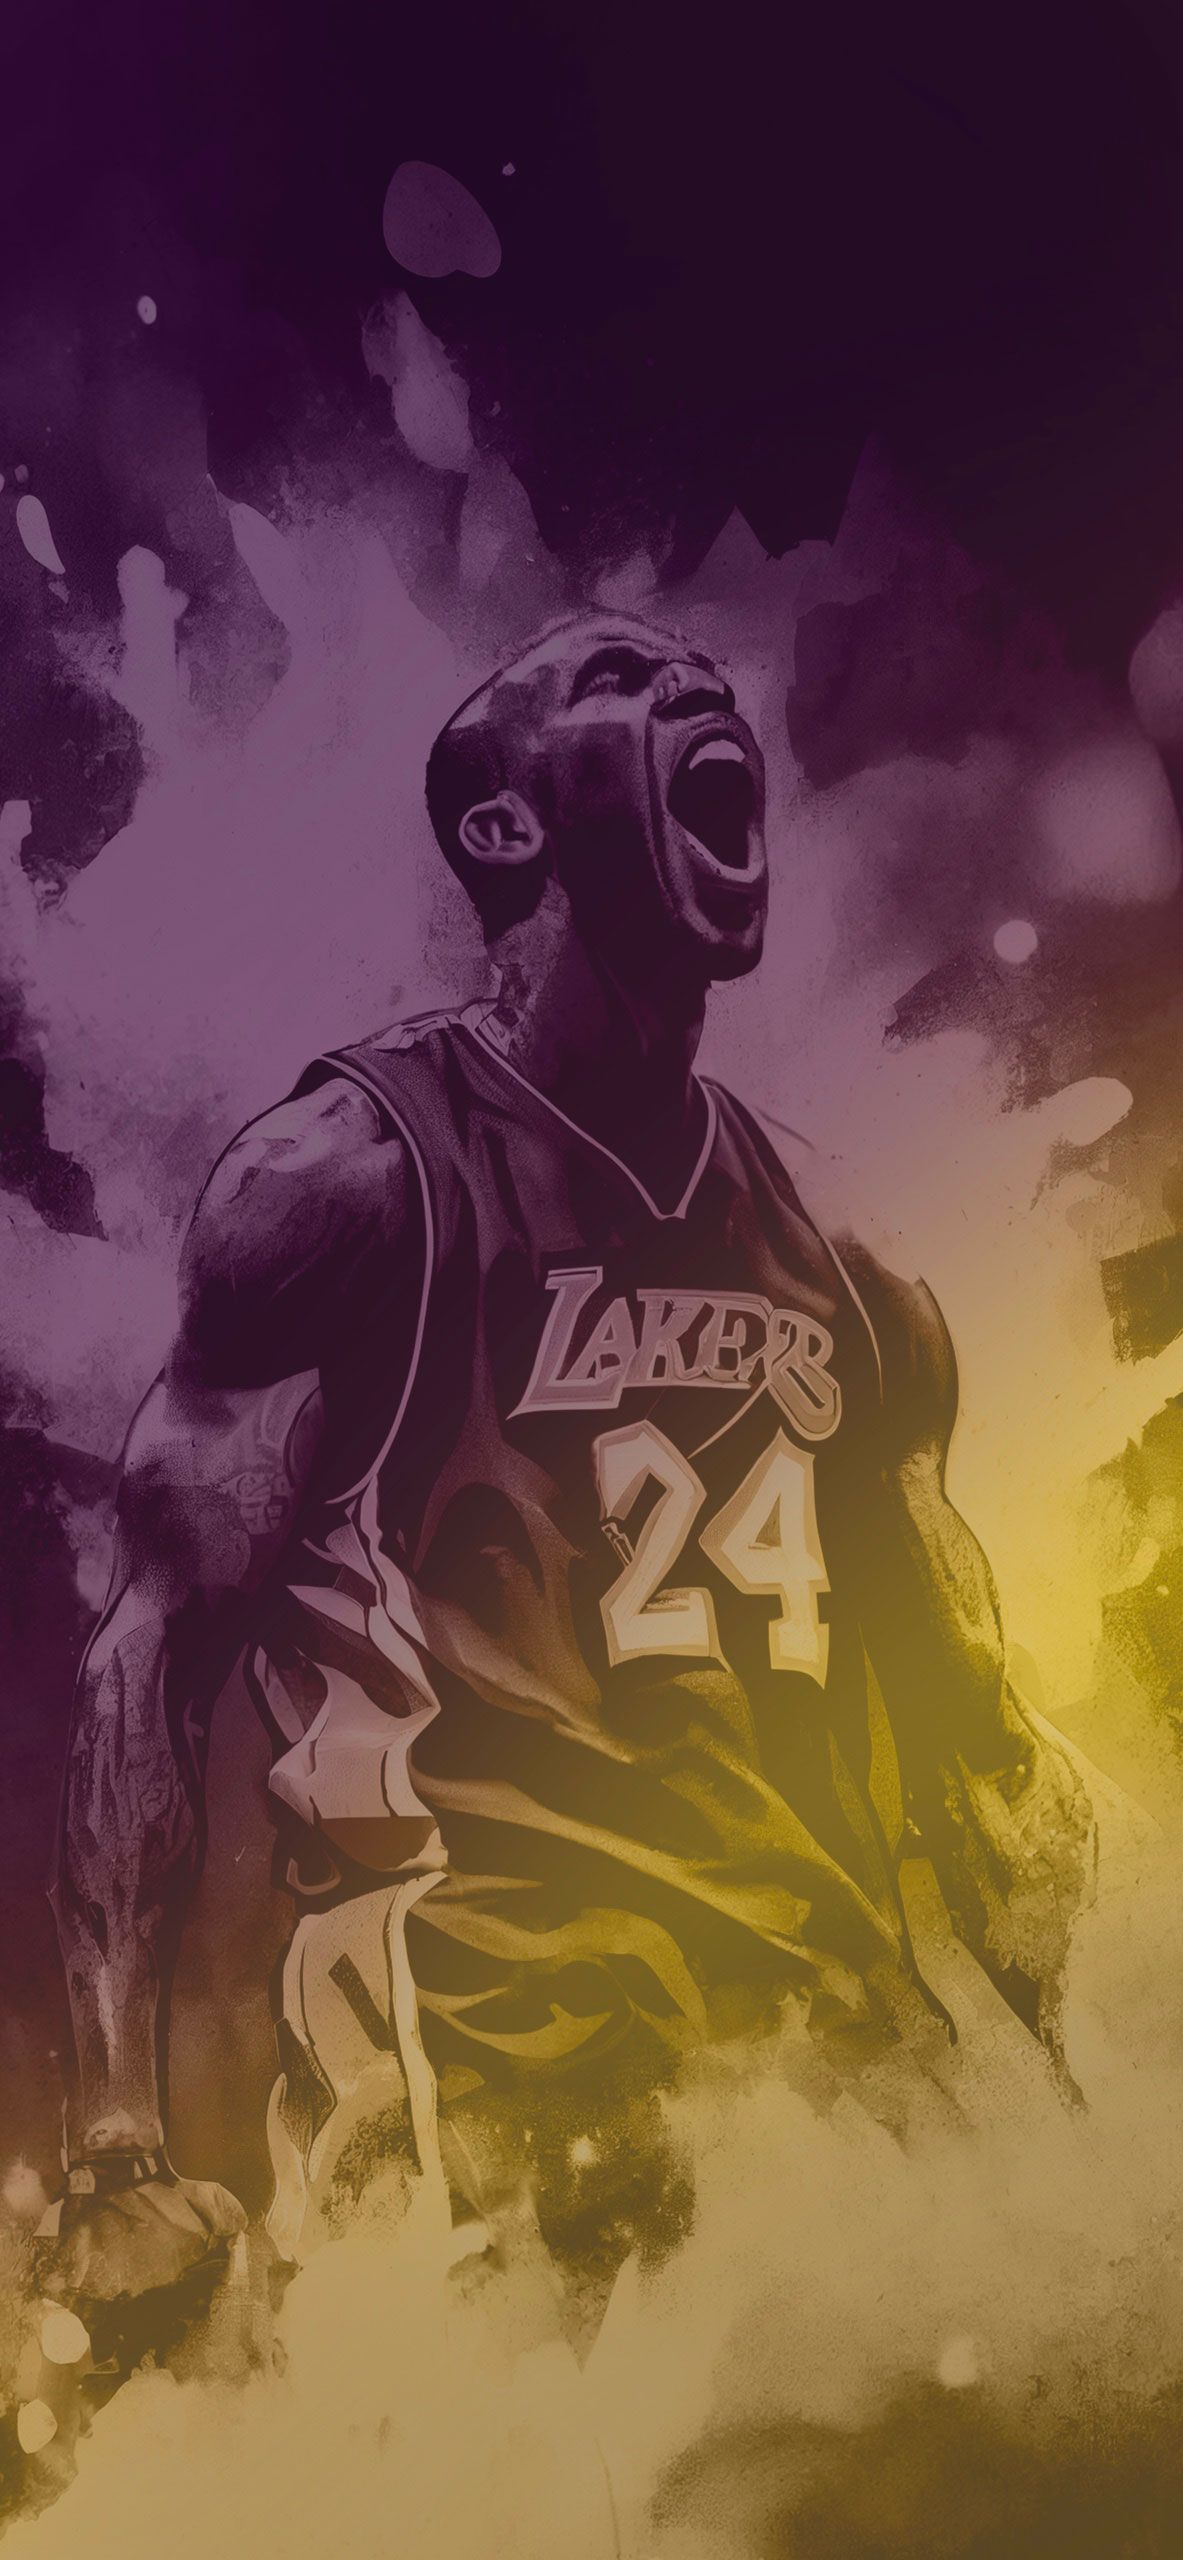 Kobe Bryant wallpaper for iPhone and Android devices. You can download this wallpaper for your desktop, mobile, laptop, iPad, iPhone, Android phone or tablet - Kobe Bryant